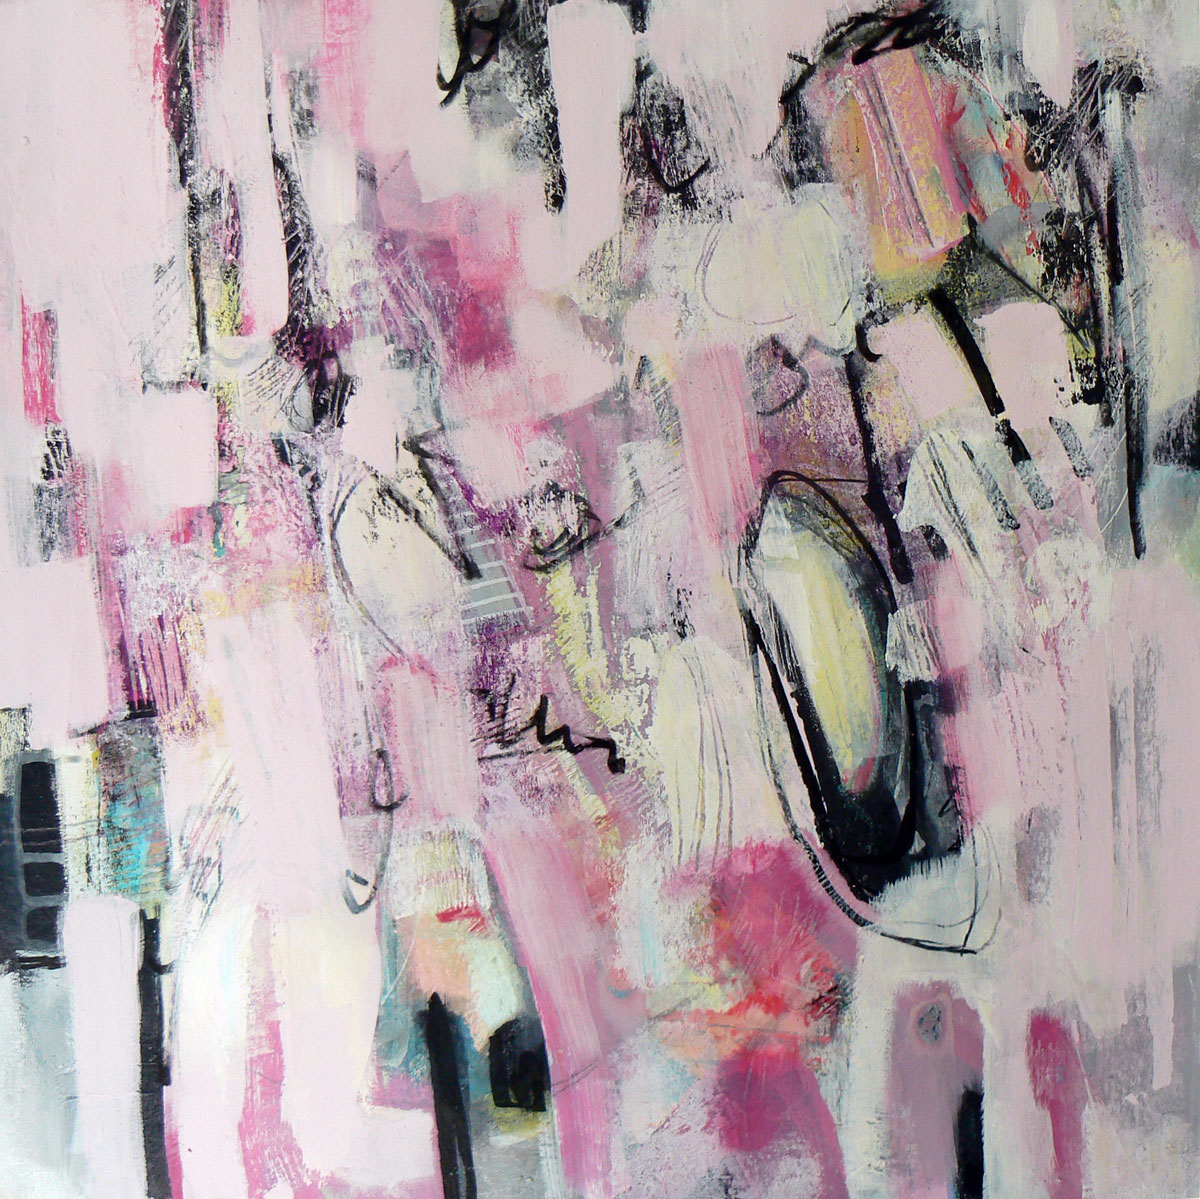 Tic-Tac-Toe - original abstract painting, pink and more pink